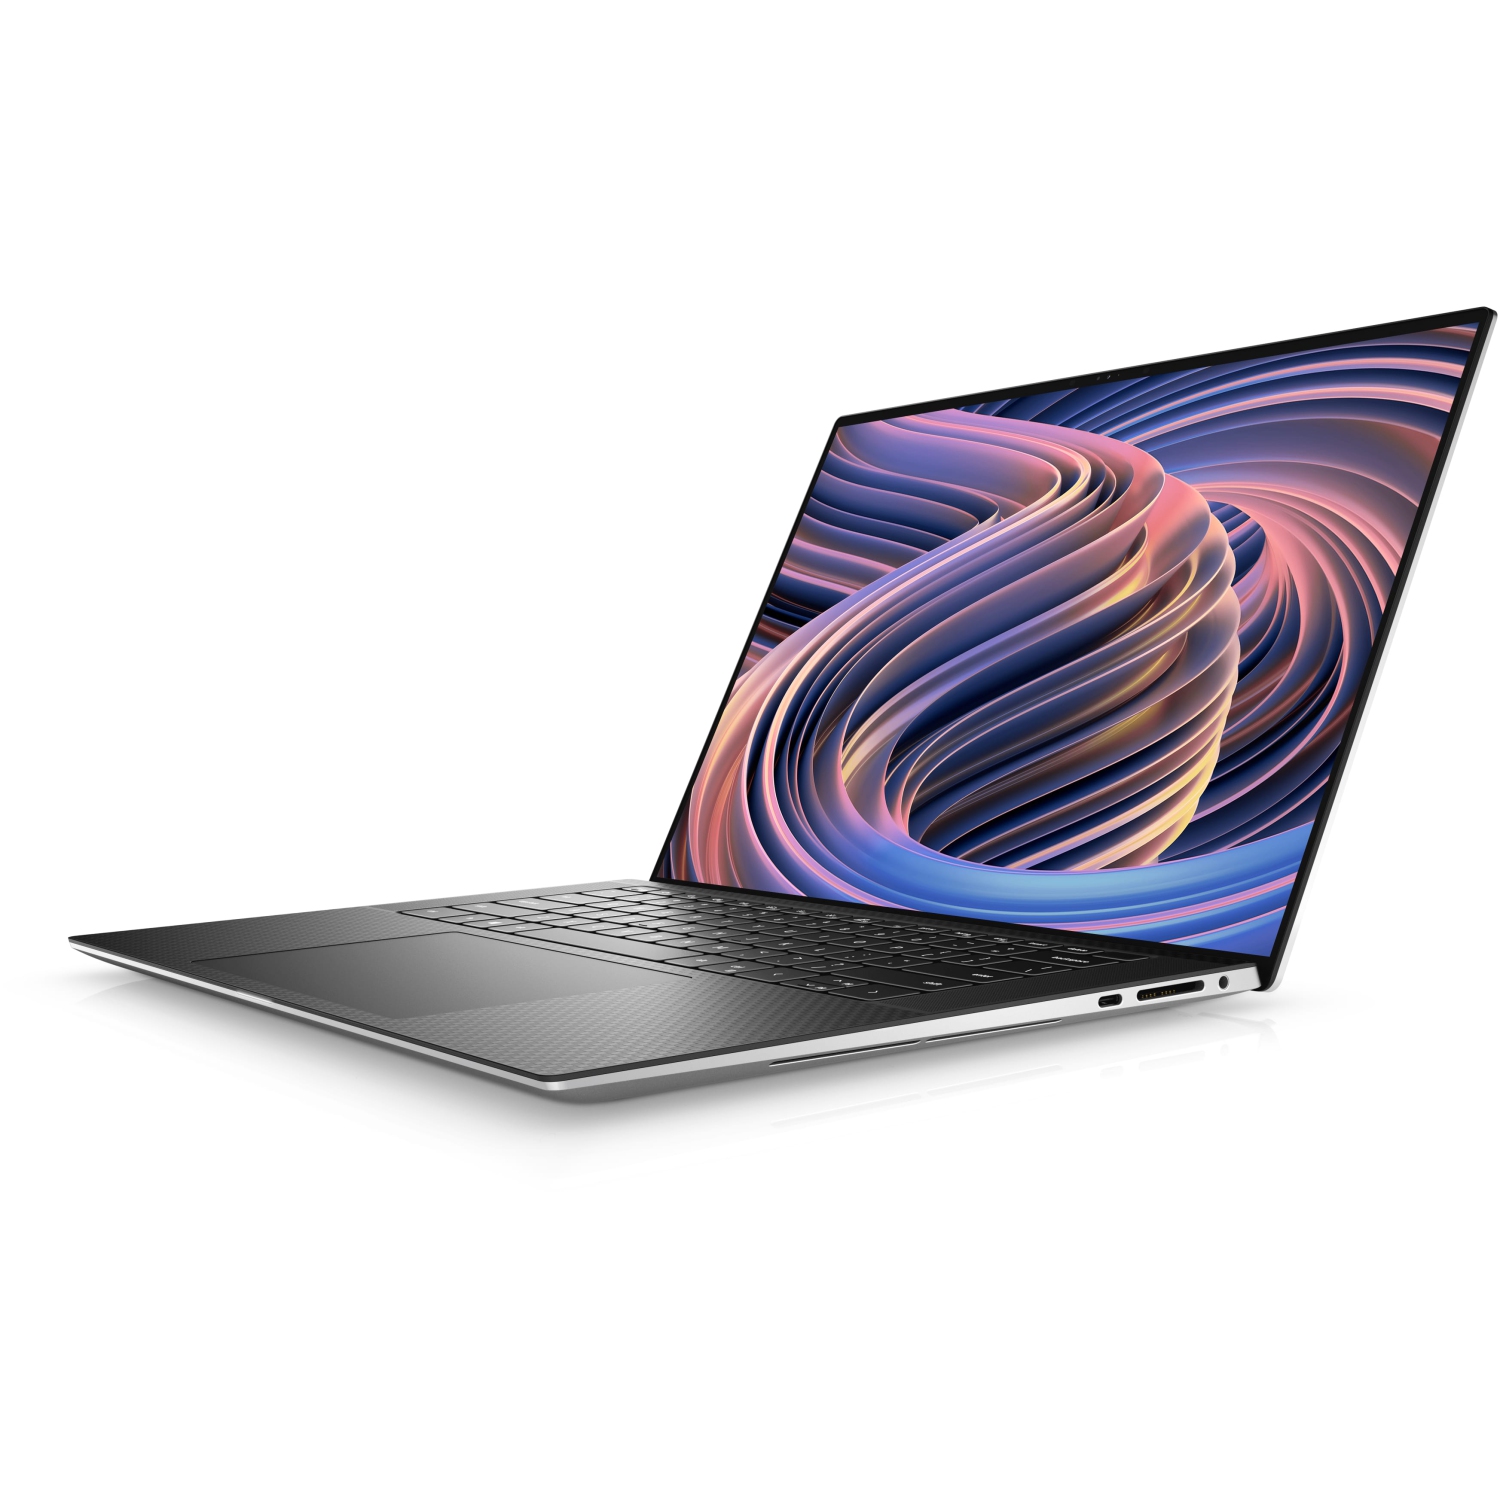 Refurbished (Excellent) – Dell XPS 9520 Laptop (2022) | 15.6" 4K Touch | Core i7 - 1TB SSD - 16GB RAM - RTX 3050 | 14 Cores @ 4.7 GHz - 12th Gen CPU